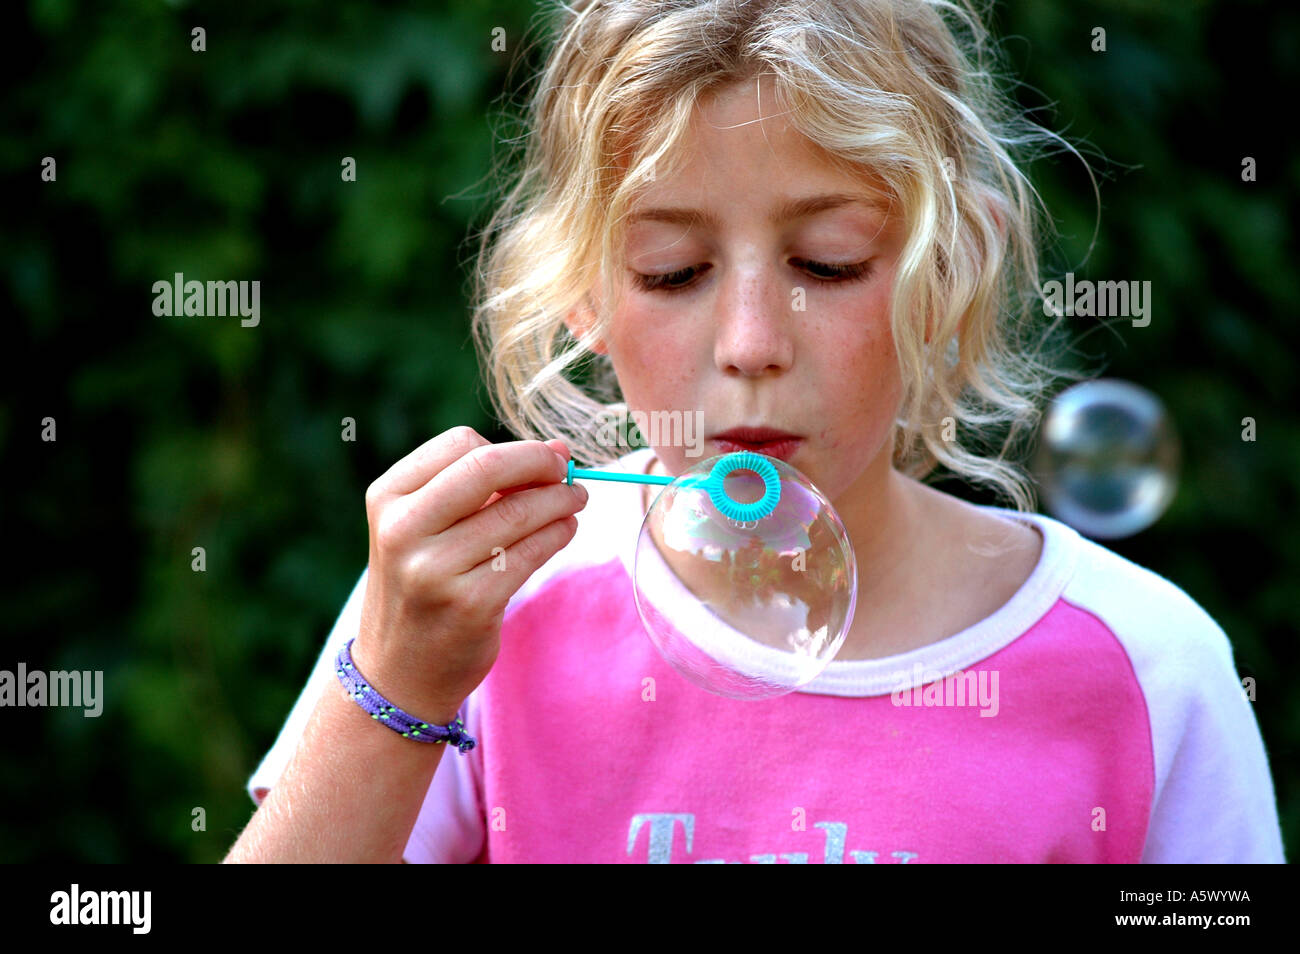 pretty, young girl blowing bubbles outside Stock Photo